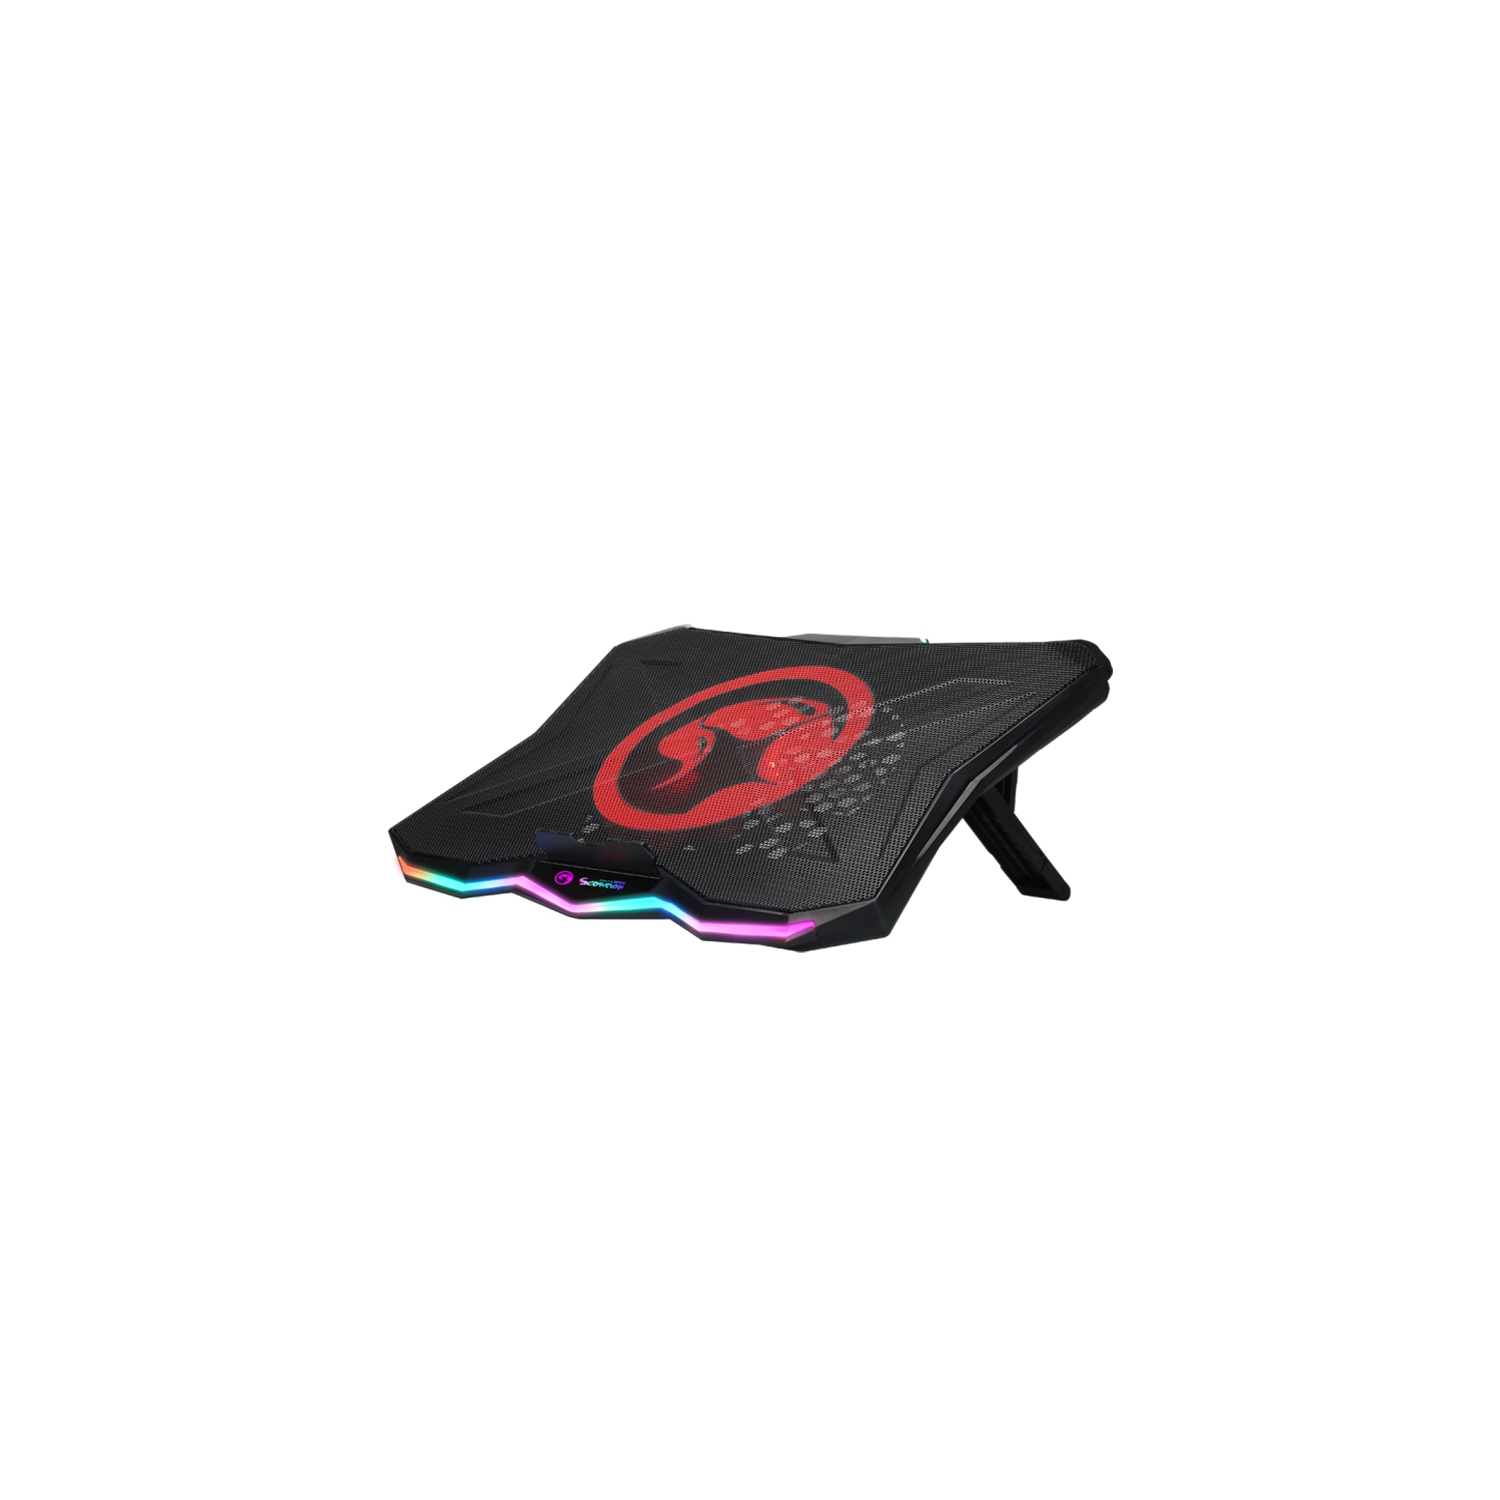 MARVO FN-40 RGB Laptop Cooler Cooling Pad, Supports Up To 17 inch